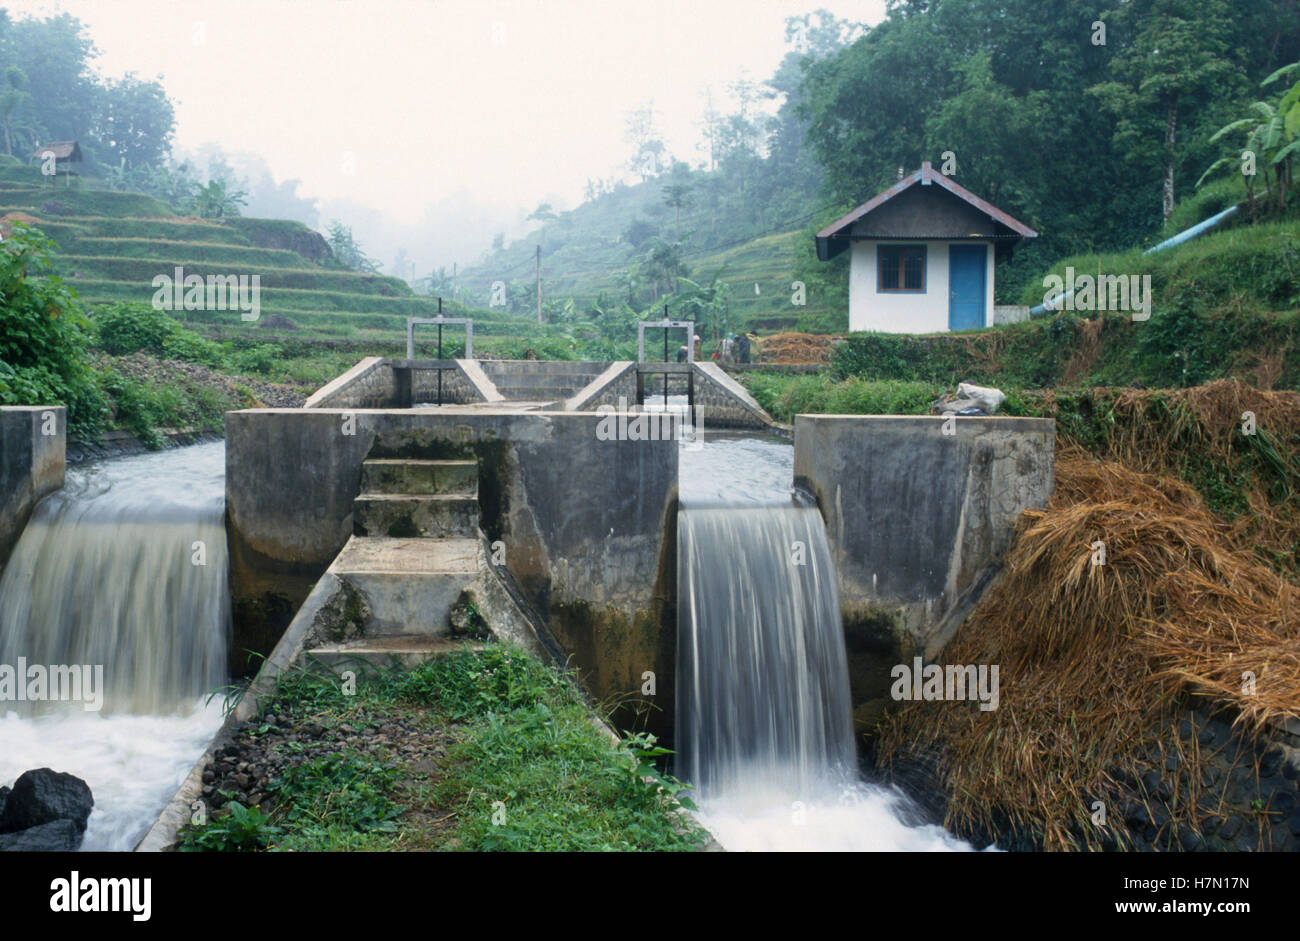 INDONESIA Java, small Hydro Power station for rural electrification, rice terrace, off-grid solution Stock Photo